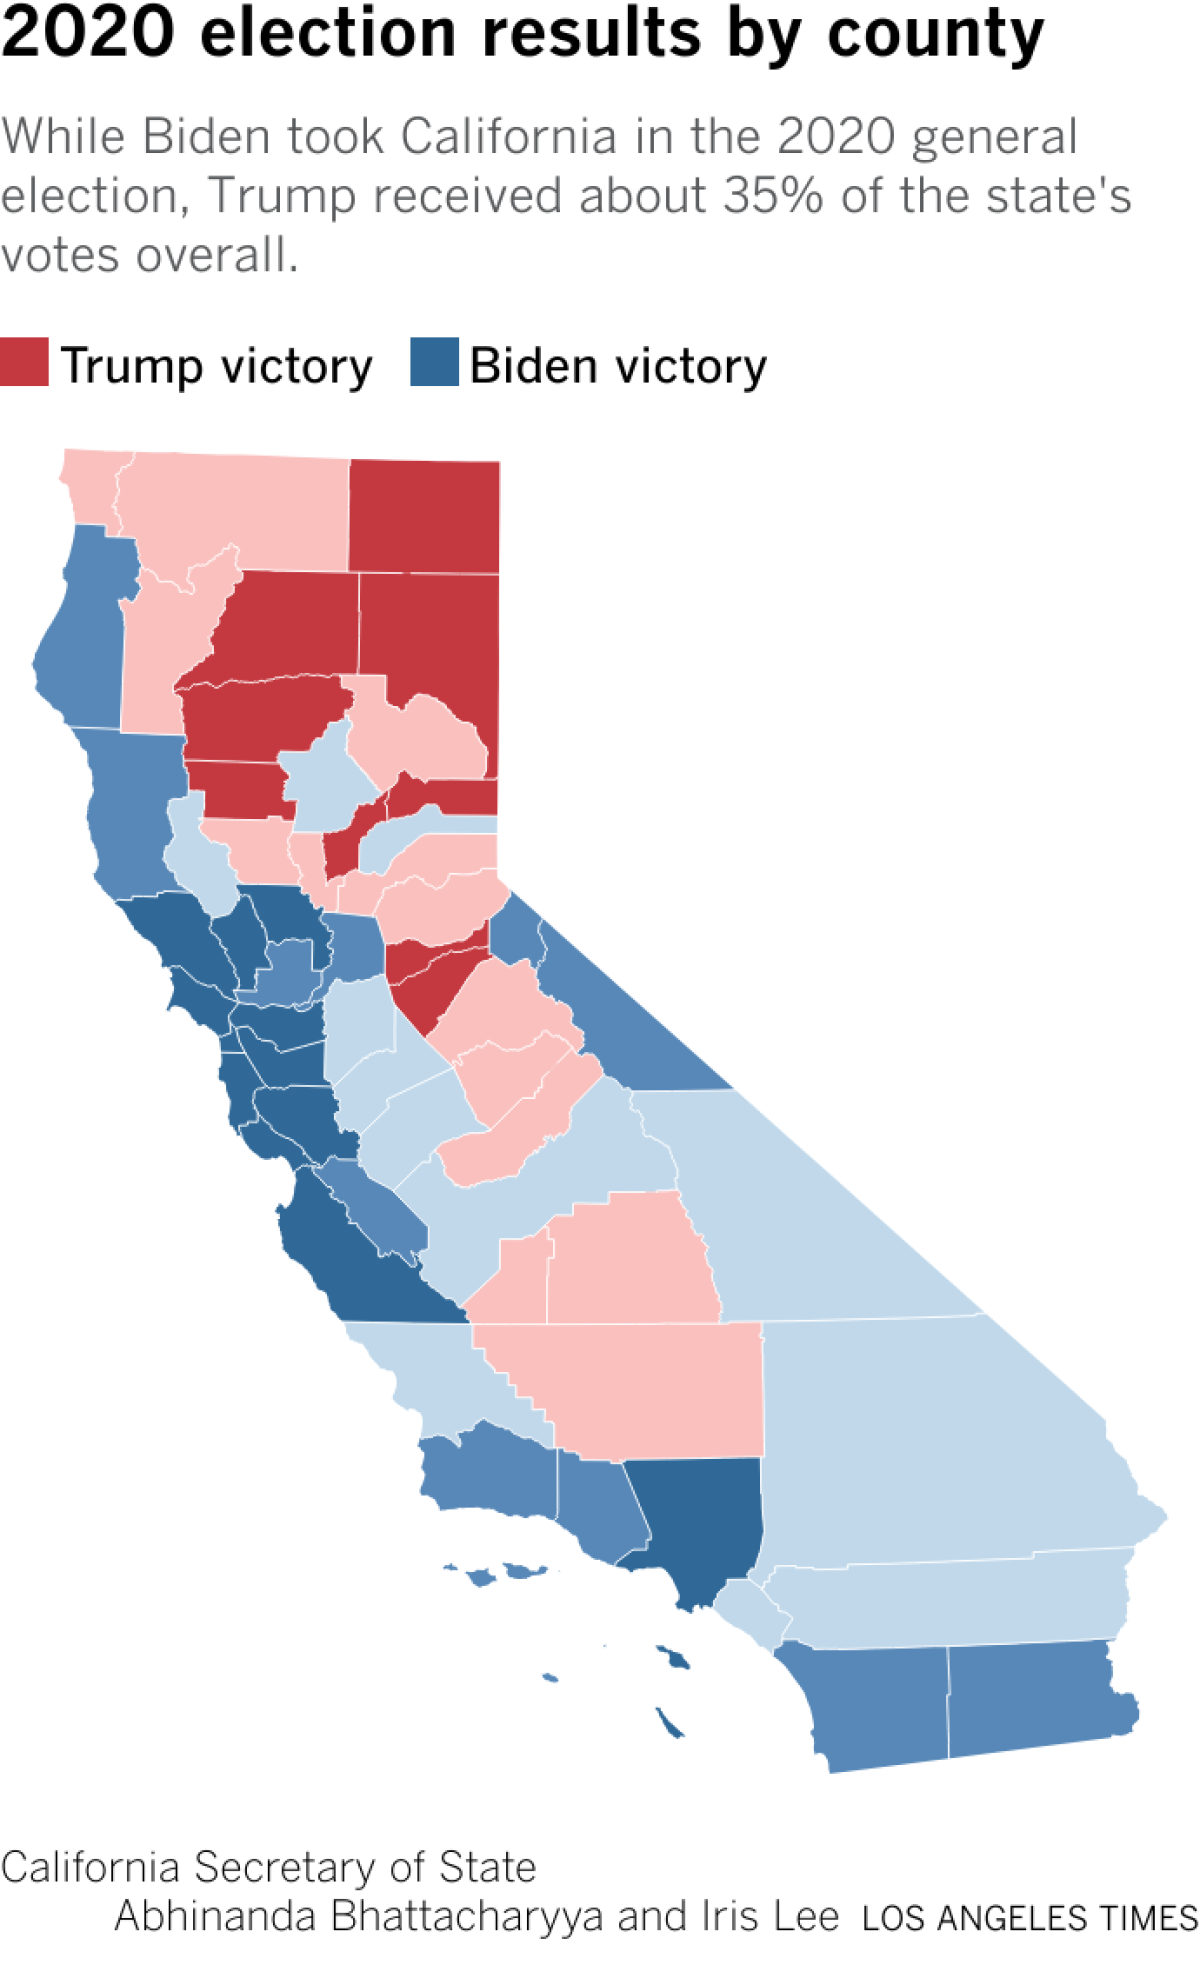 Map of California counties showing which counties voted in favor of Biden and Trump, shaded by the margin of victory in percentages.